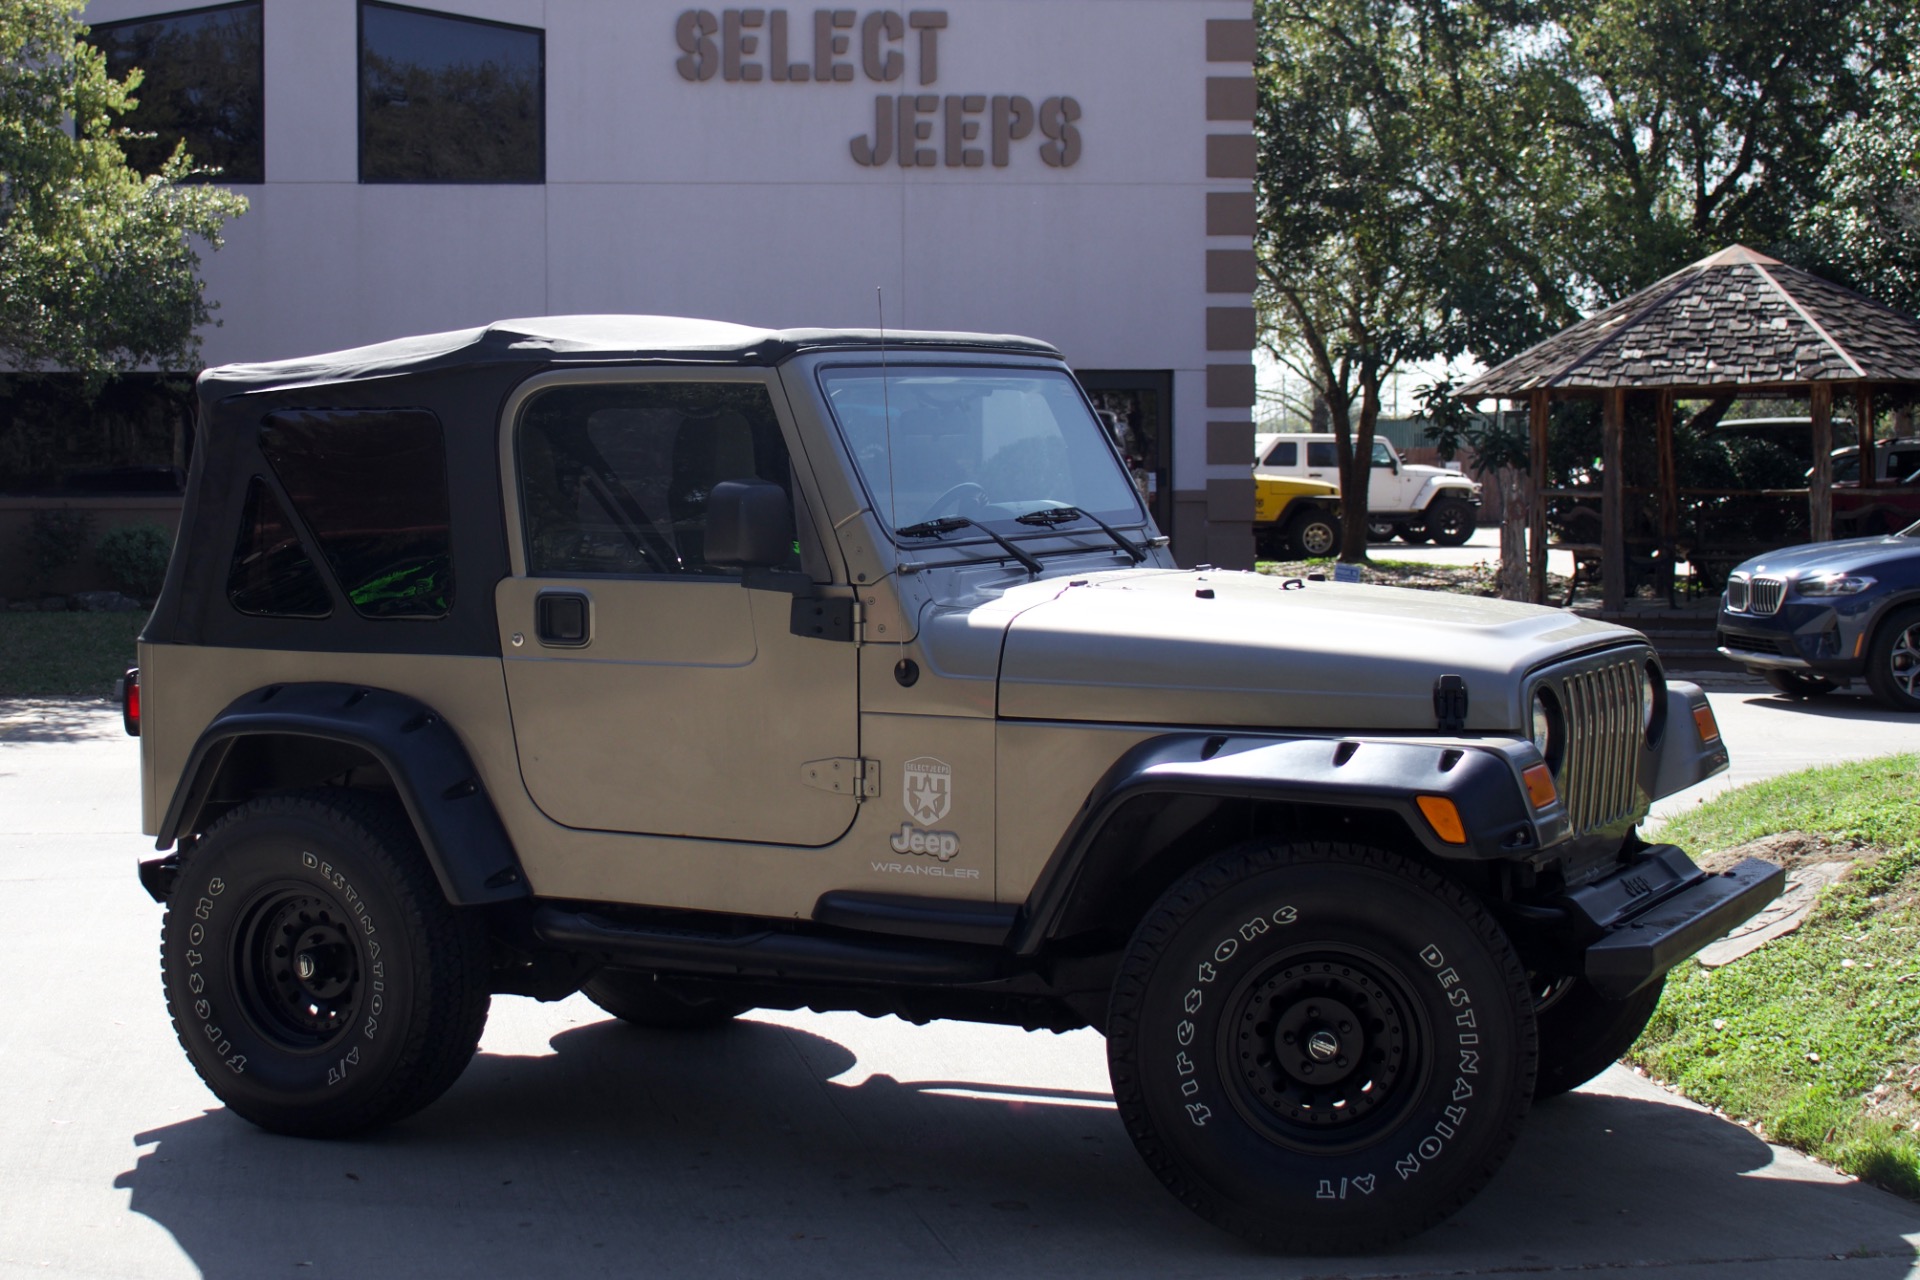 Used 2005 Jeep Wrangler X For Sale ($21,995) | Select Jeeps Inc. Stock  #330846